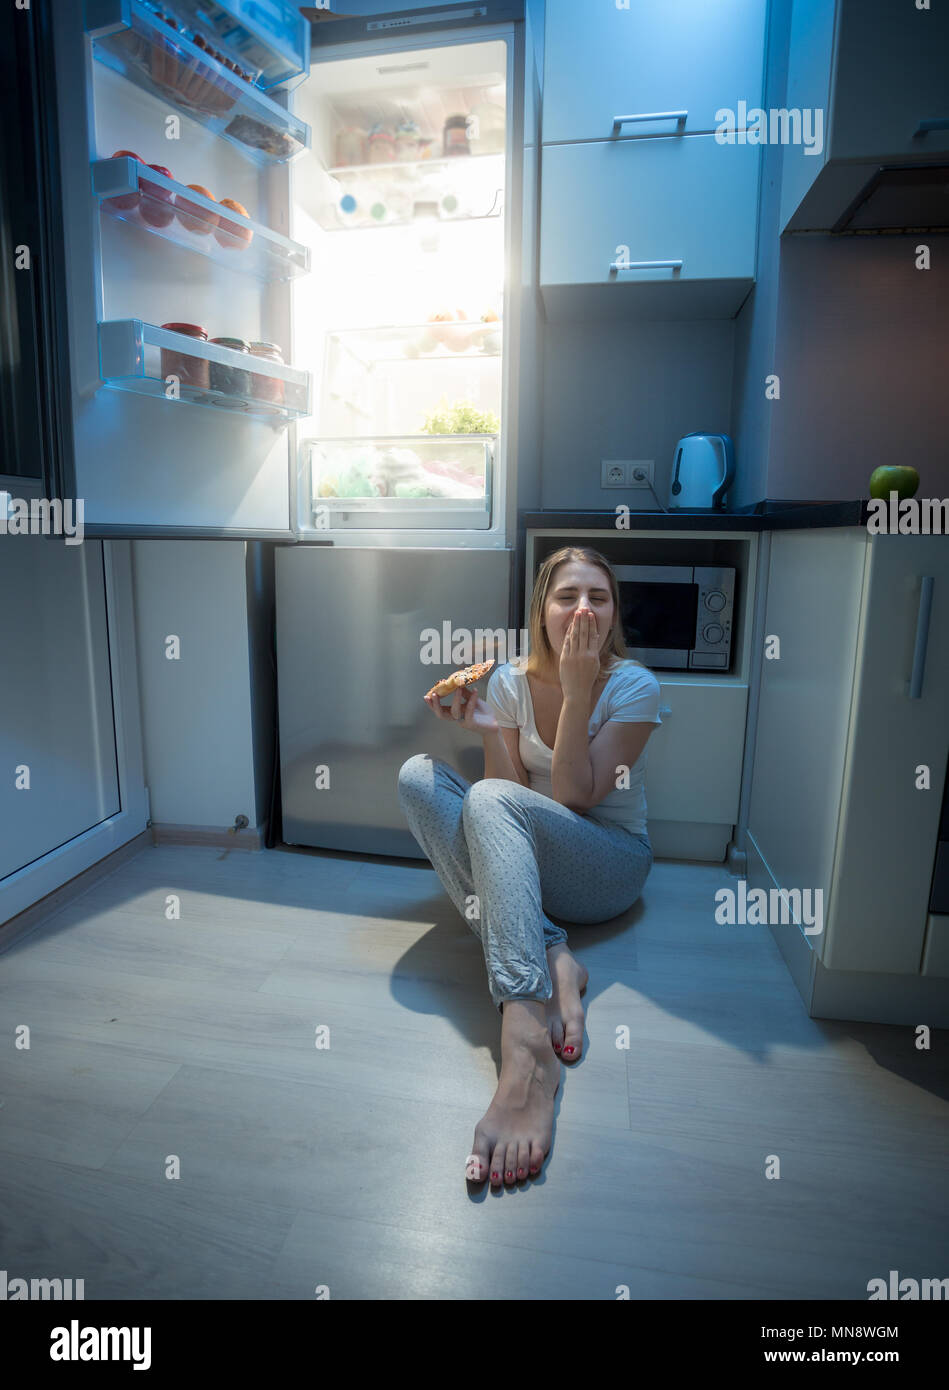 Sleepy hungry woman sitting on kitchen floor at night and holding pizza Stock Photo